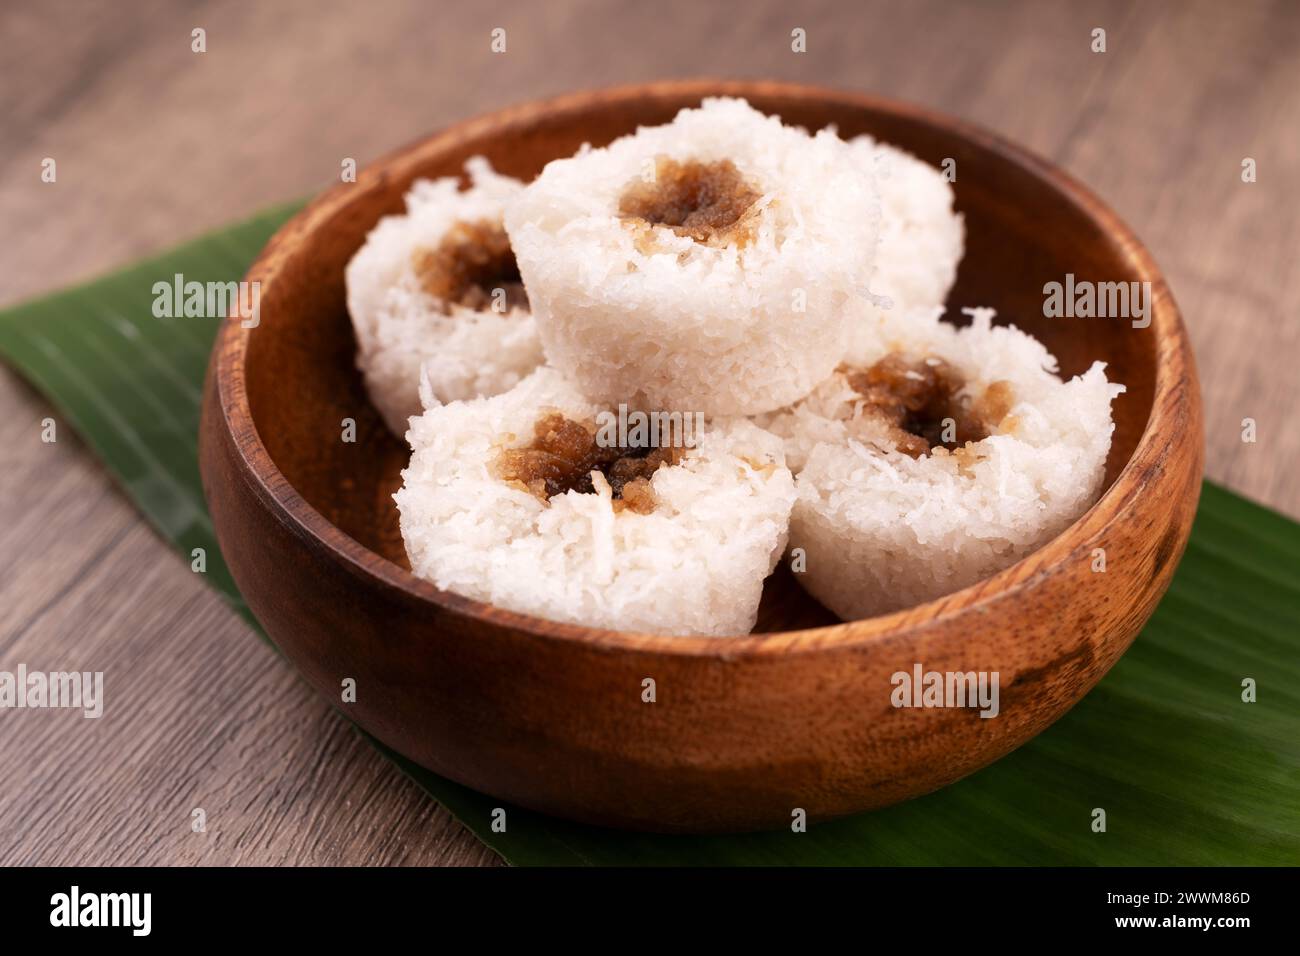 Close up of putu bambu or steamed rice flour cake with grated coconut and palm sugar filling Stock Photo